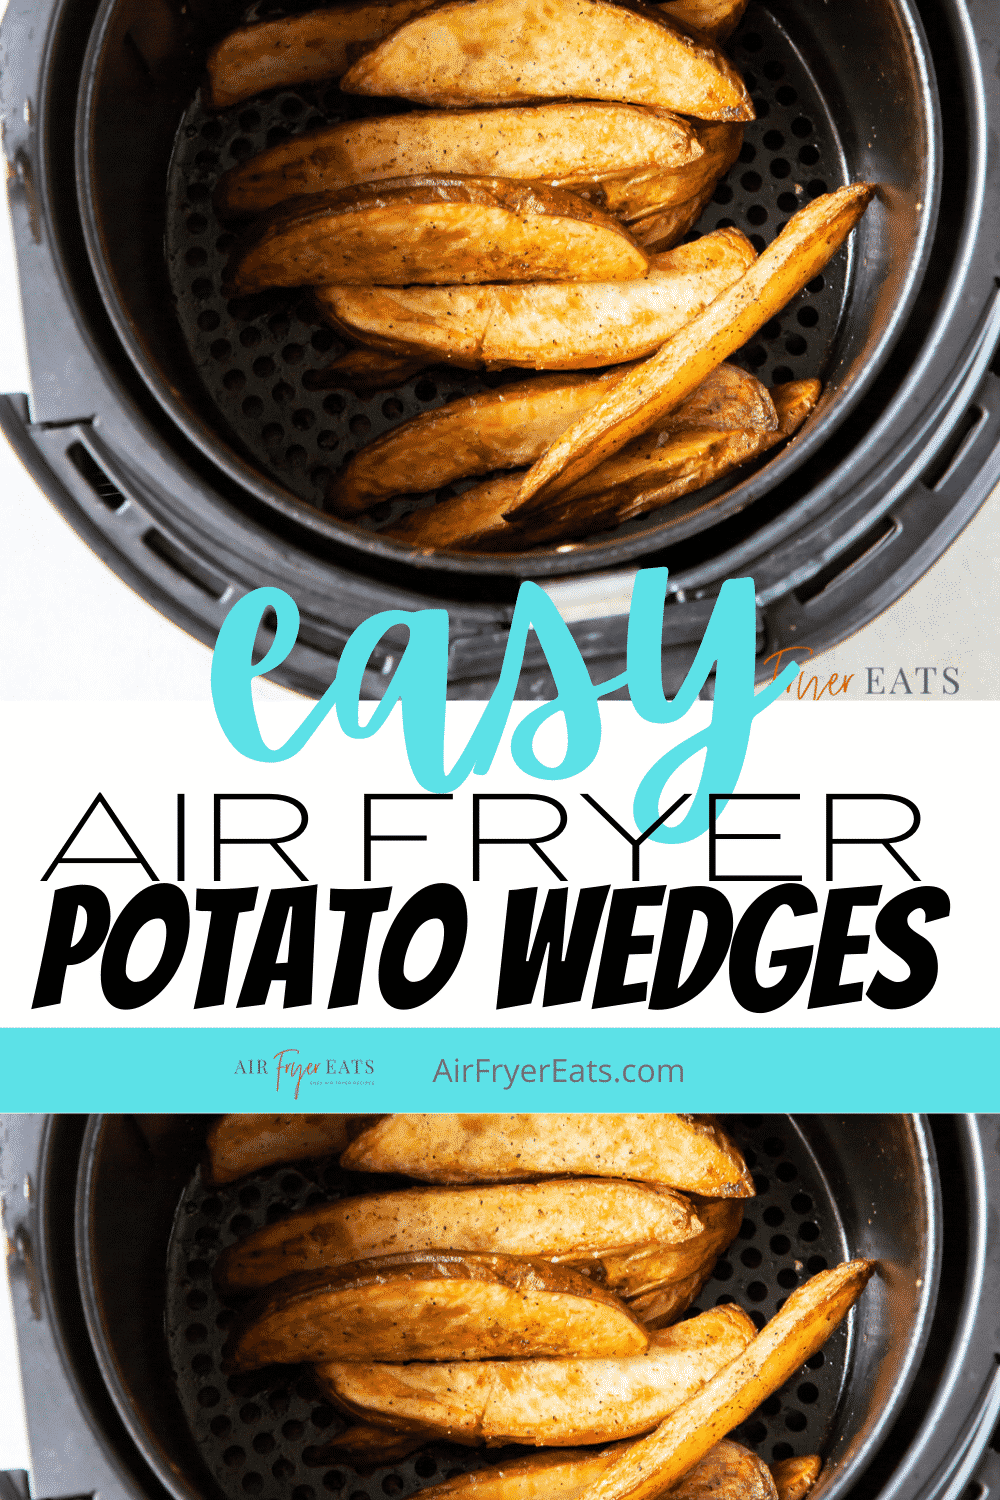 Air Fryer potato wedges are perfectly seasoned, rustic french fries that cook up beautifully crispy in your air fryer. Serve these as a side dish with your favorite dinners, you'll keep coming back to this recipe again and again. #frenchfries #airfryer via @vegetarianmamma